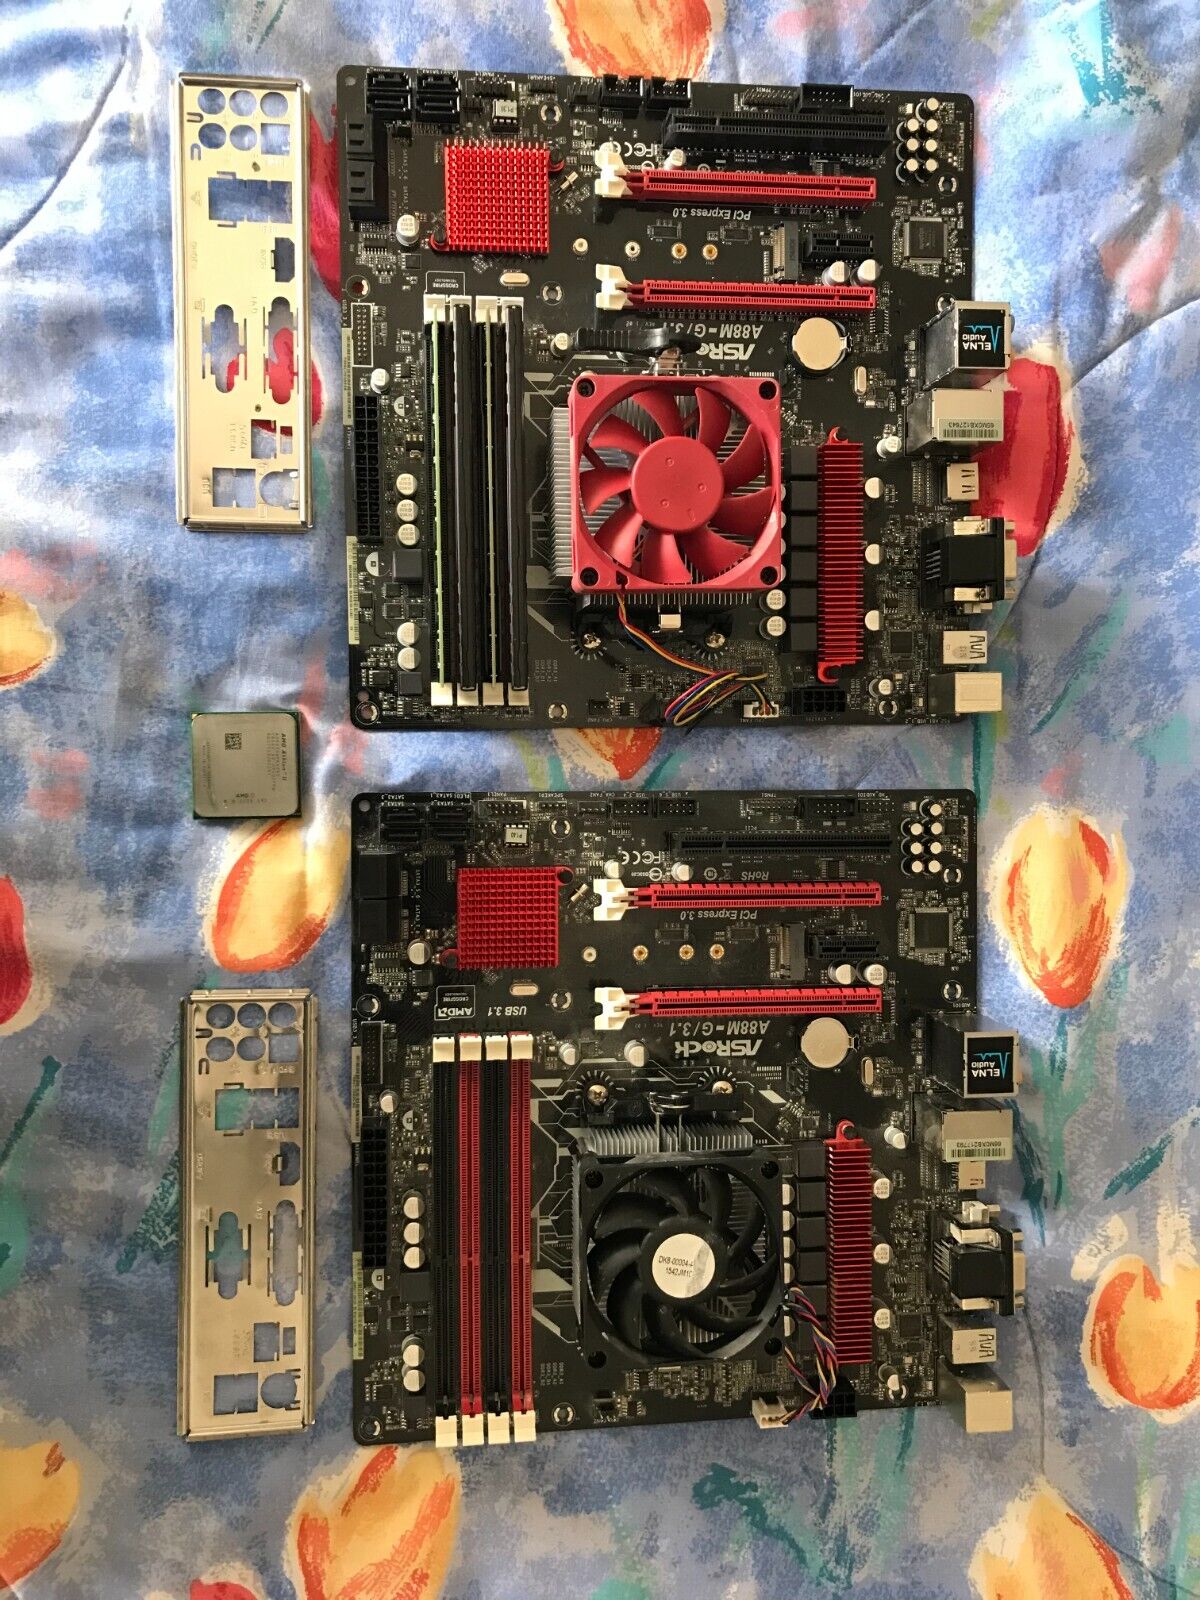 ASRock A88M/3.1 Motherboards